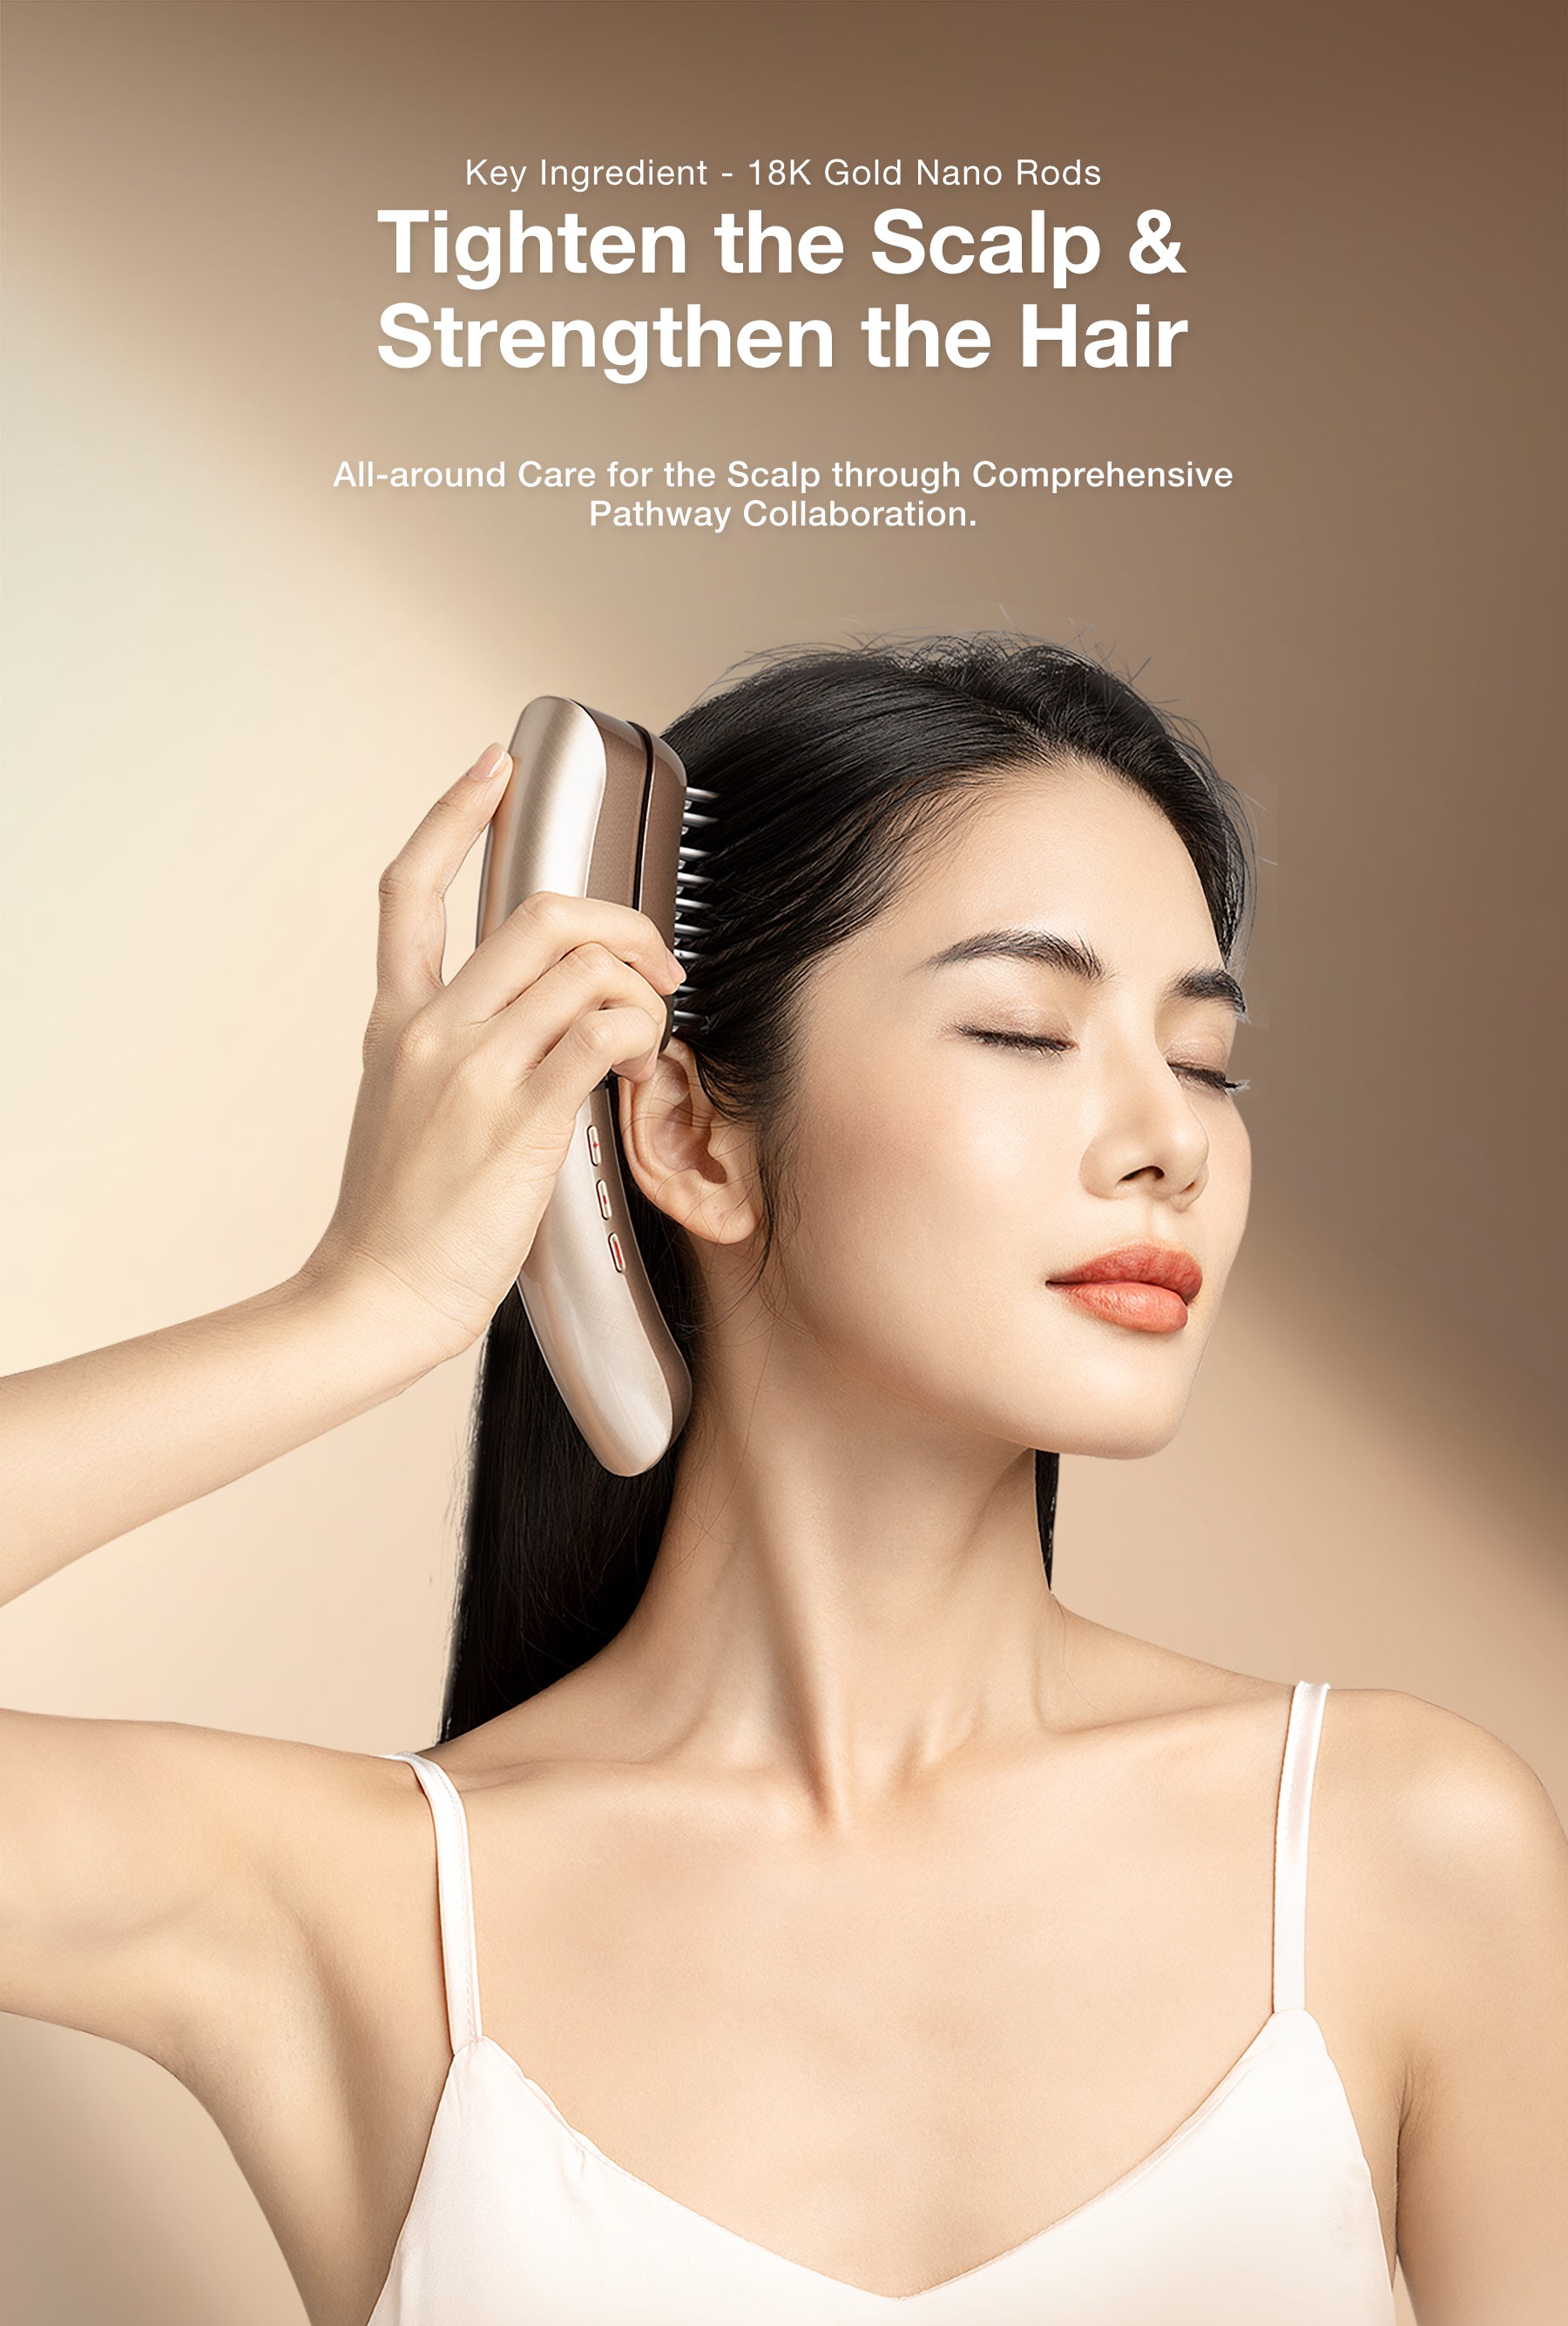 JOVS Slimax Microcurrent Full-body Anti-aging Device with 18K gold nano rods tightening scalp and strengthening hair.